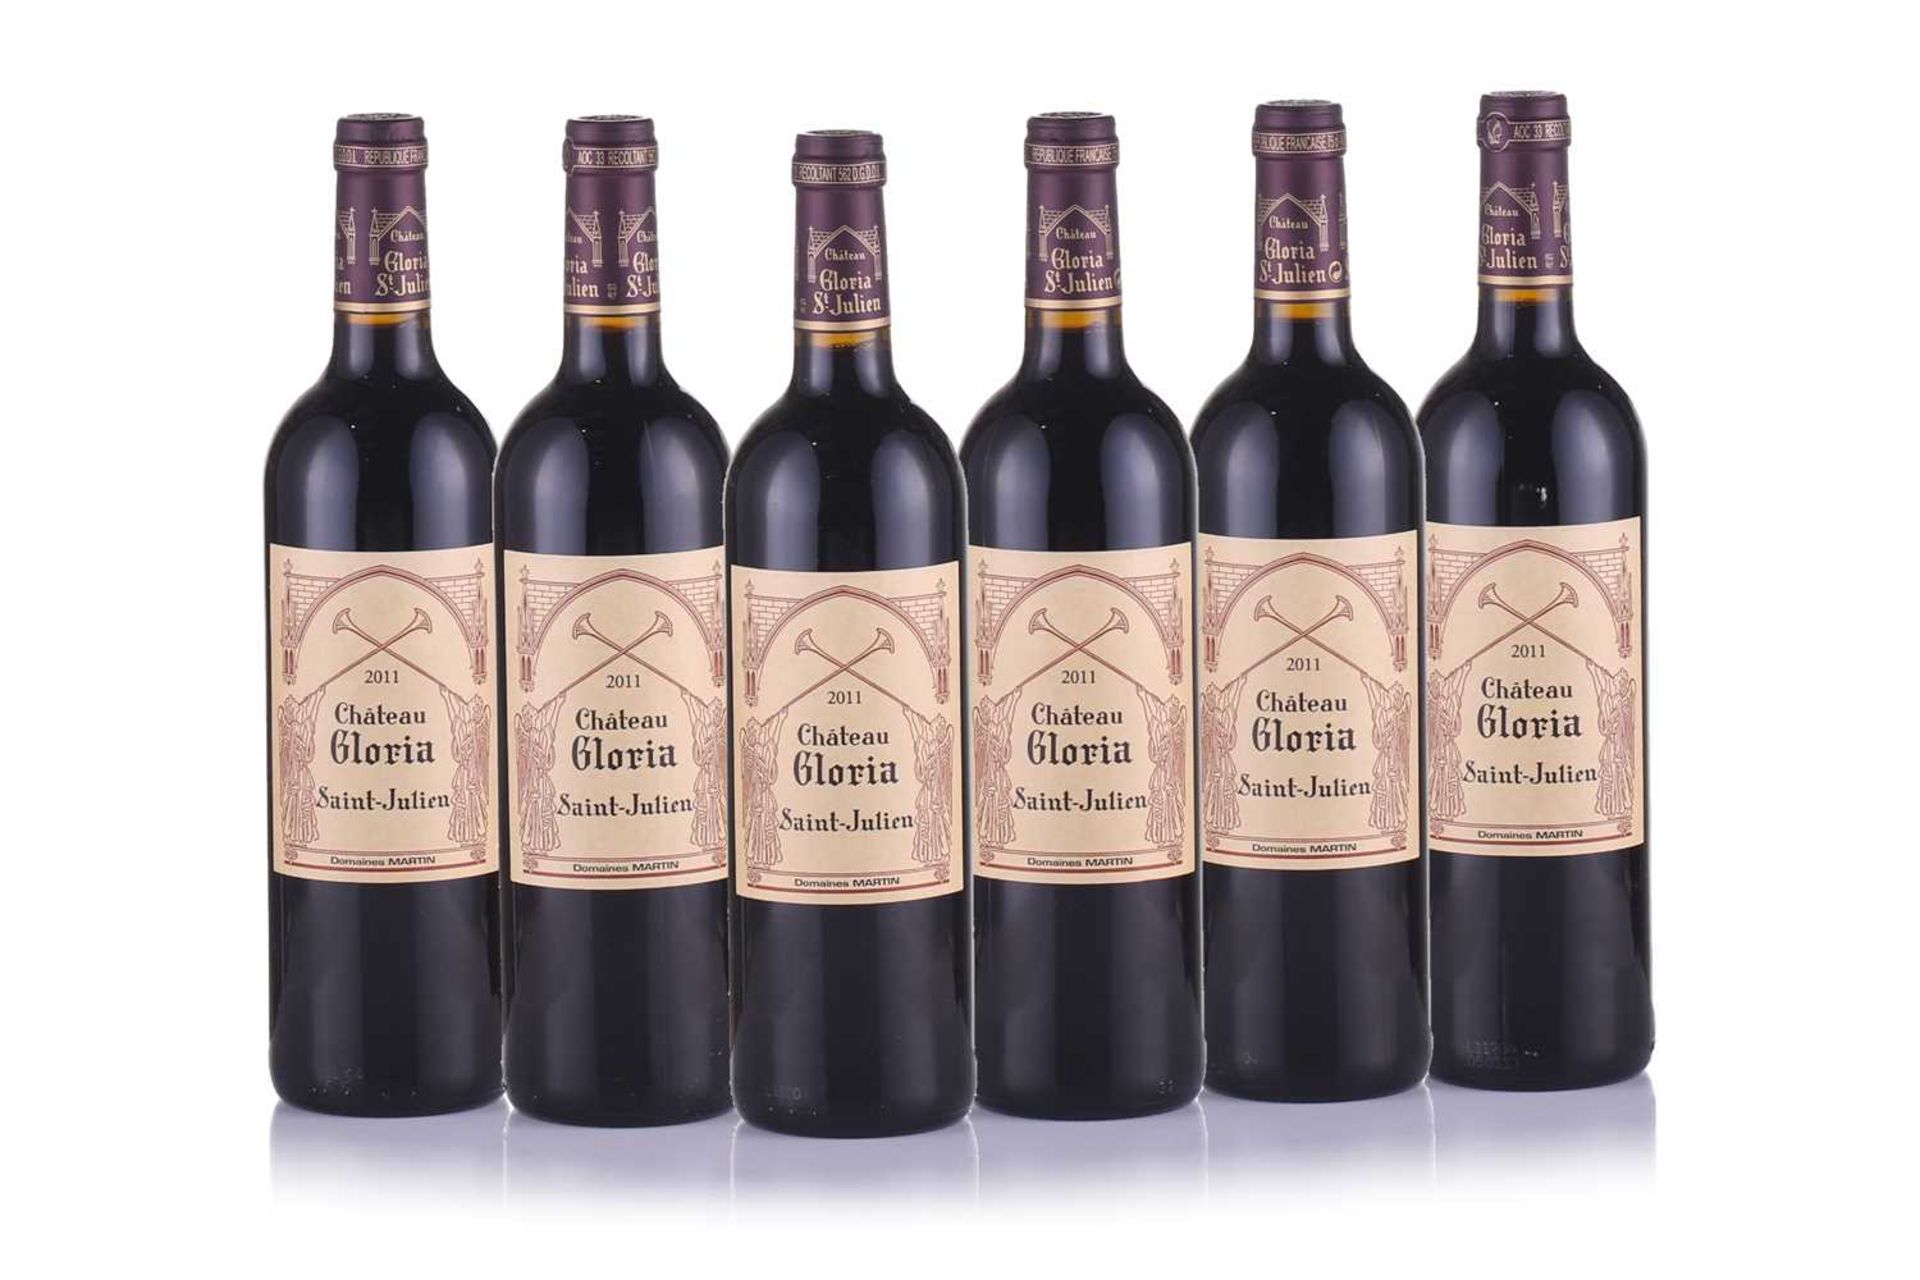 Six bottles of Chateau Gloria St Julien Bordeaux, 2011, OWCPrivate collector in London Unopened